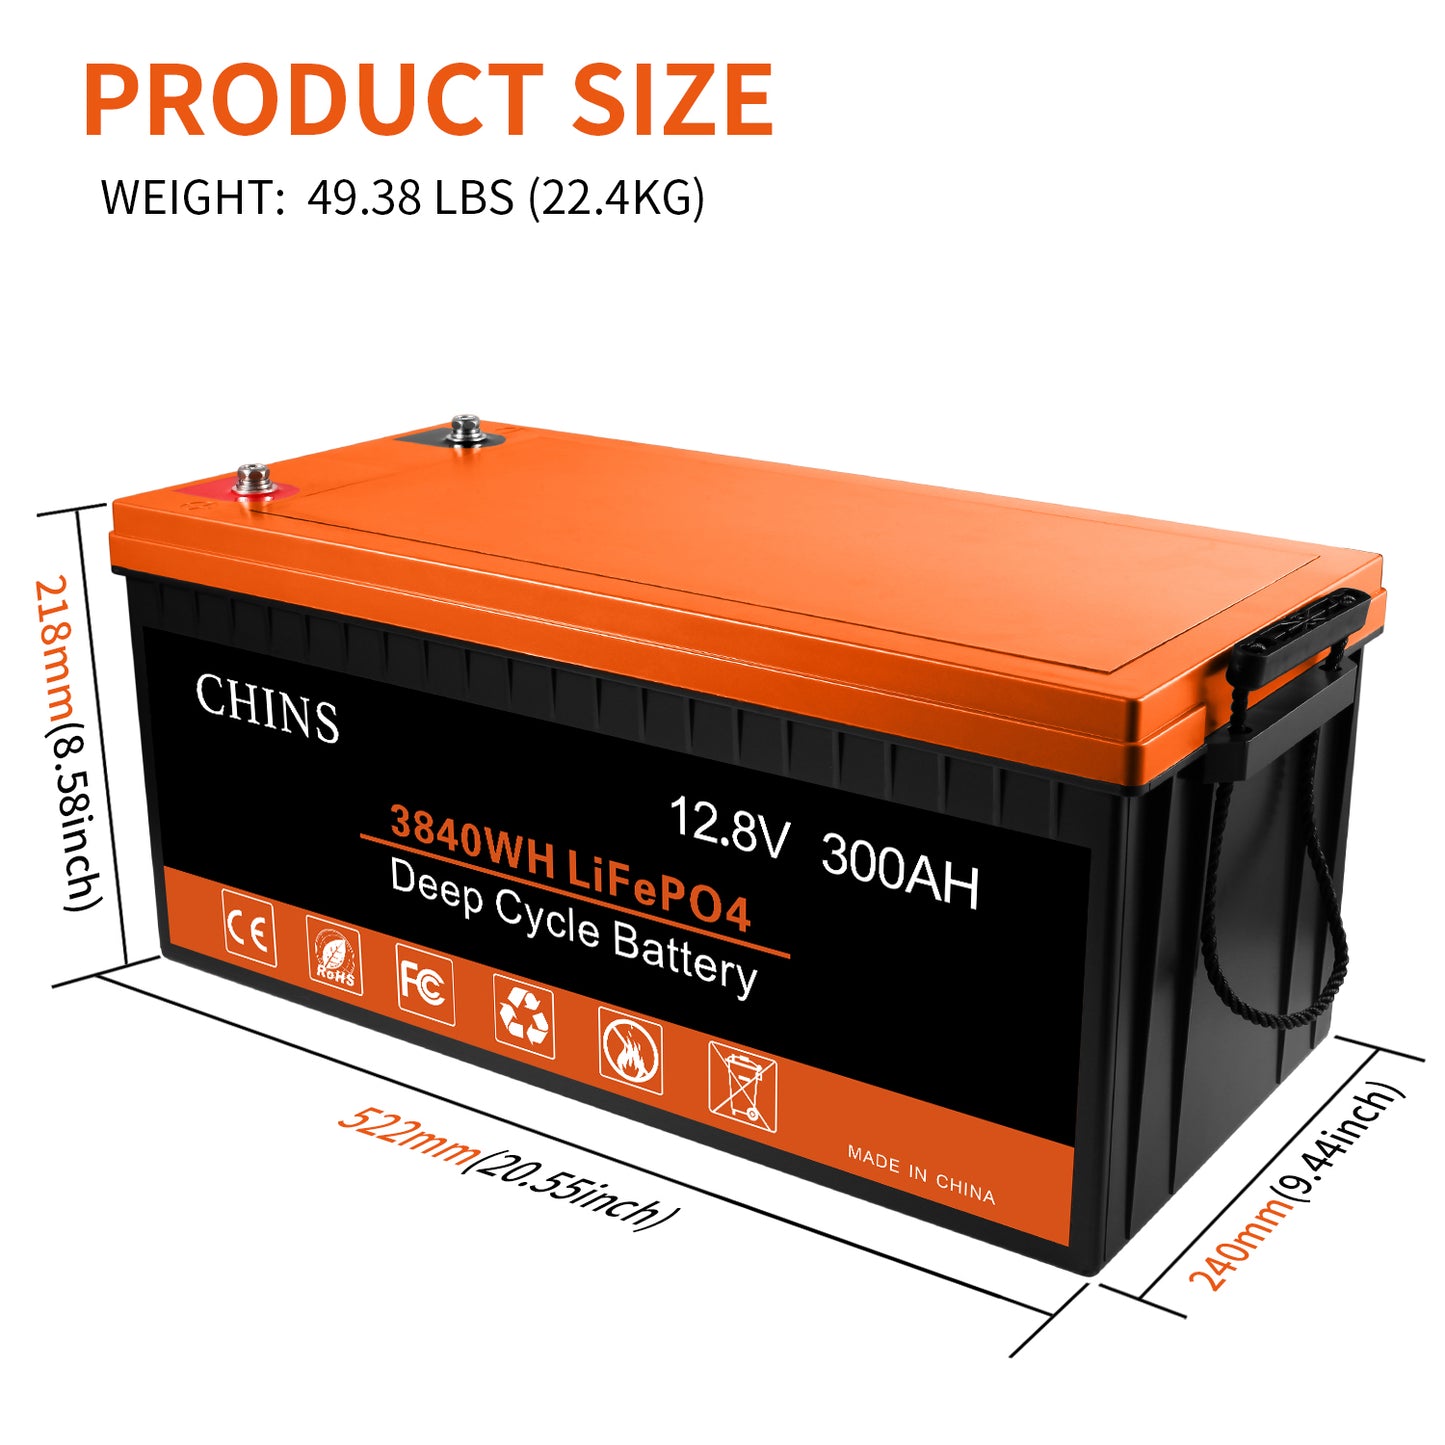 CHINS 12V 300Ah LiFePO4 Lithium Battery - Built-in 200A BMS, Perfect for Replacing Most of Backup Power, Home Energy Storage and Off-Grid etc.